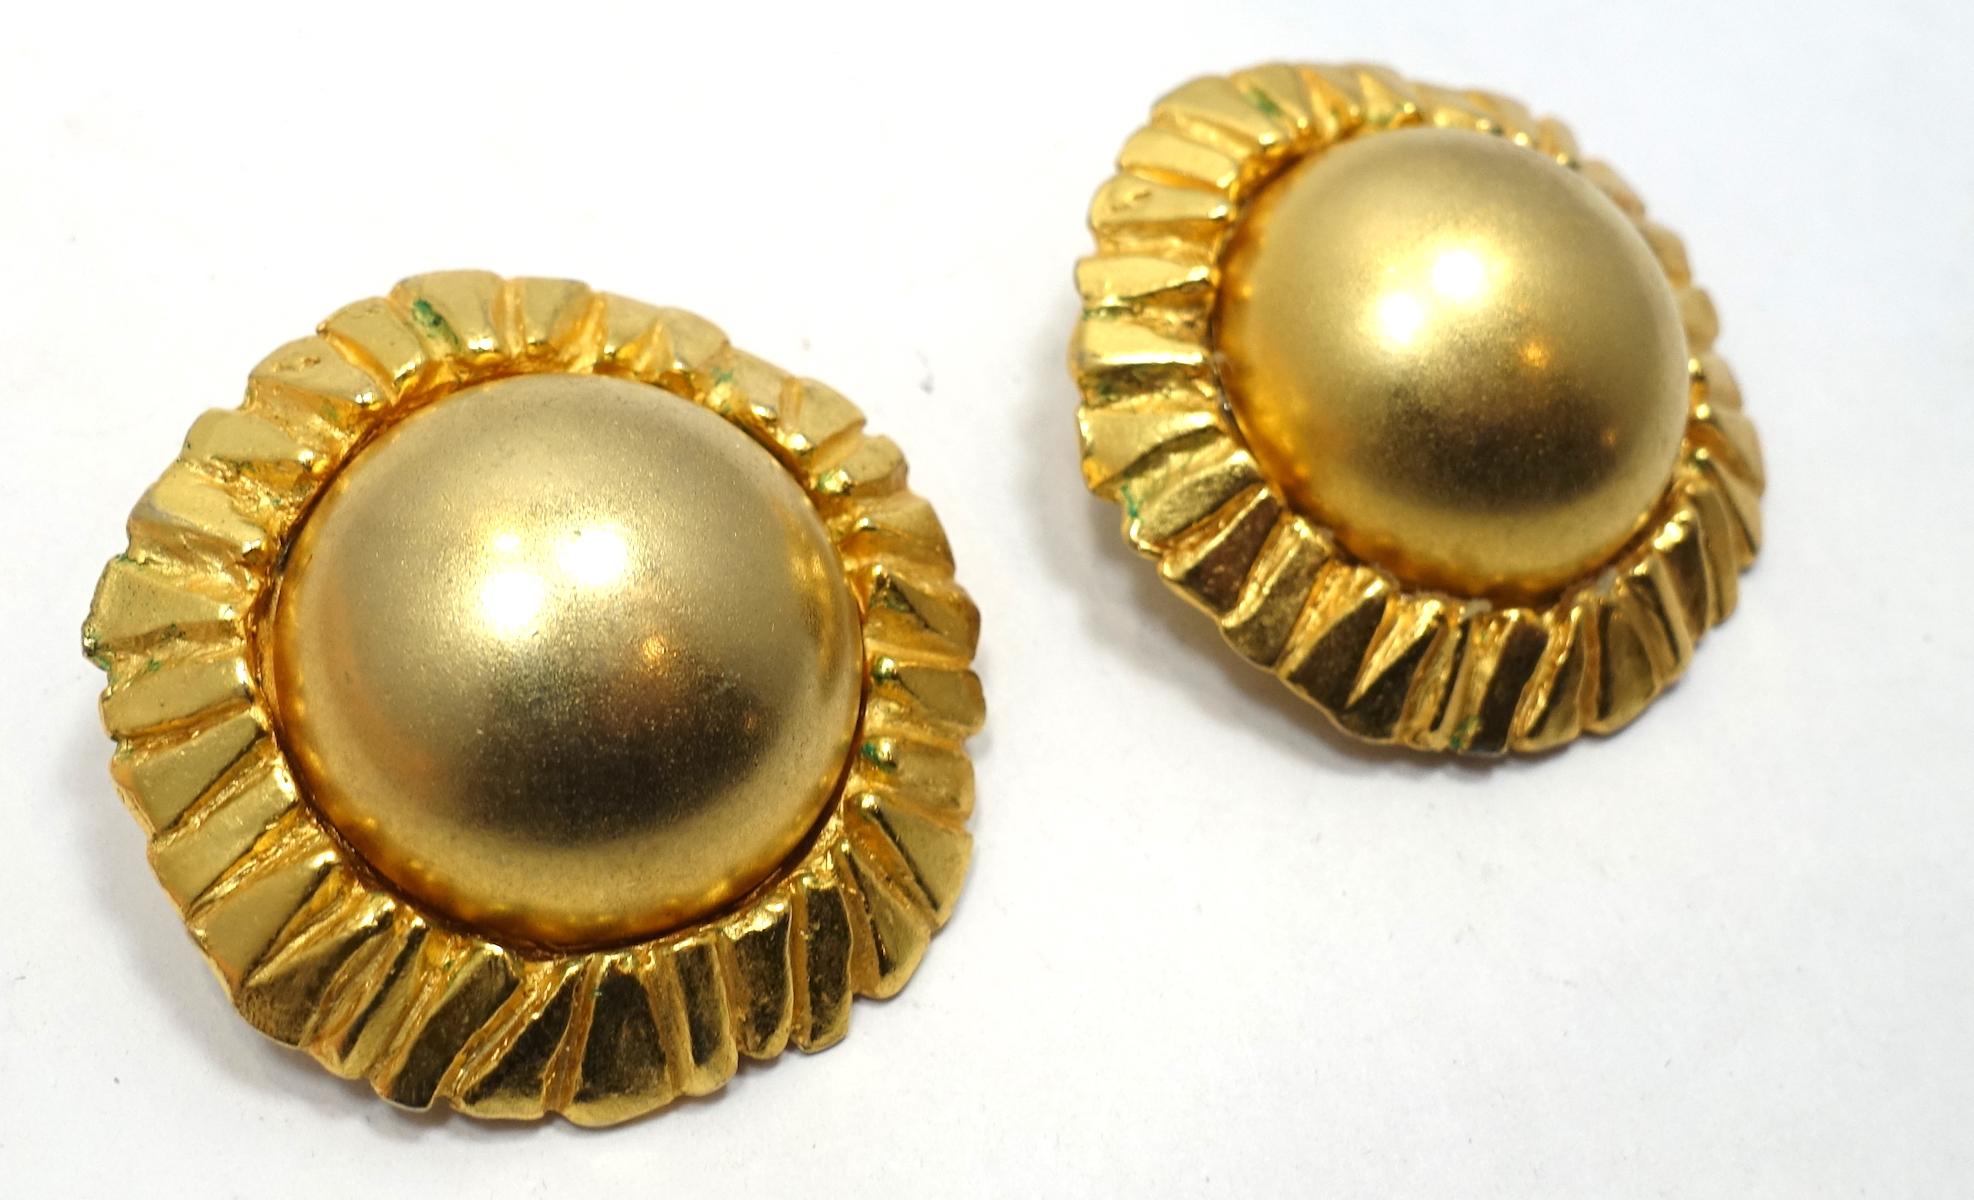 These vintage signed Poggi Paris earrings have a dome design with a ribbed edge in a gold tone setting.  In excellent condition, these clip earrings measure 1-7/8” in diameter and are signed “Poggi Paris”.